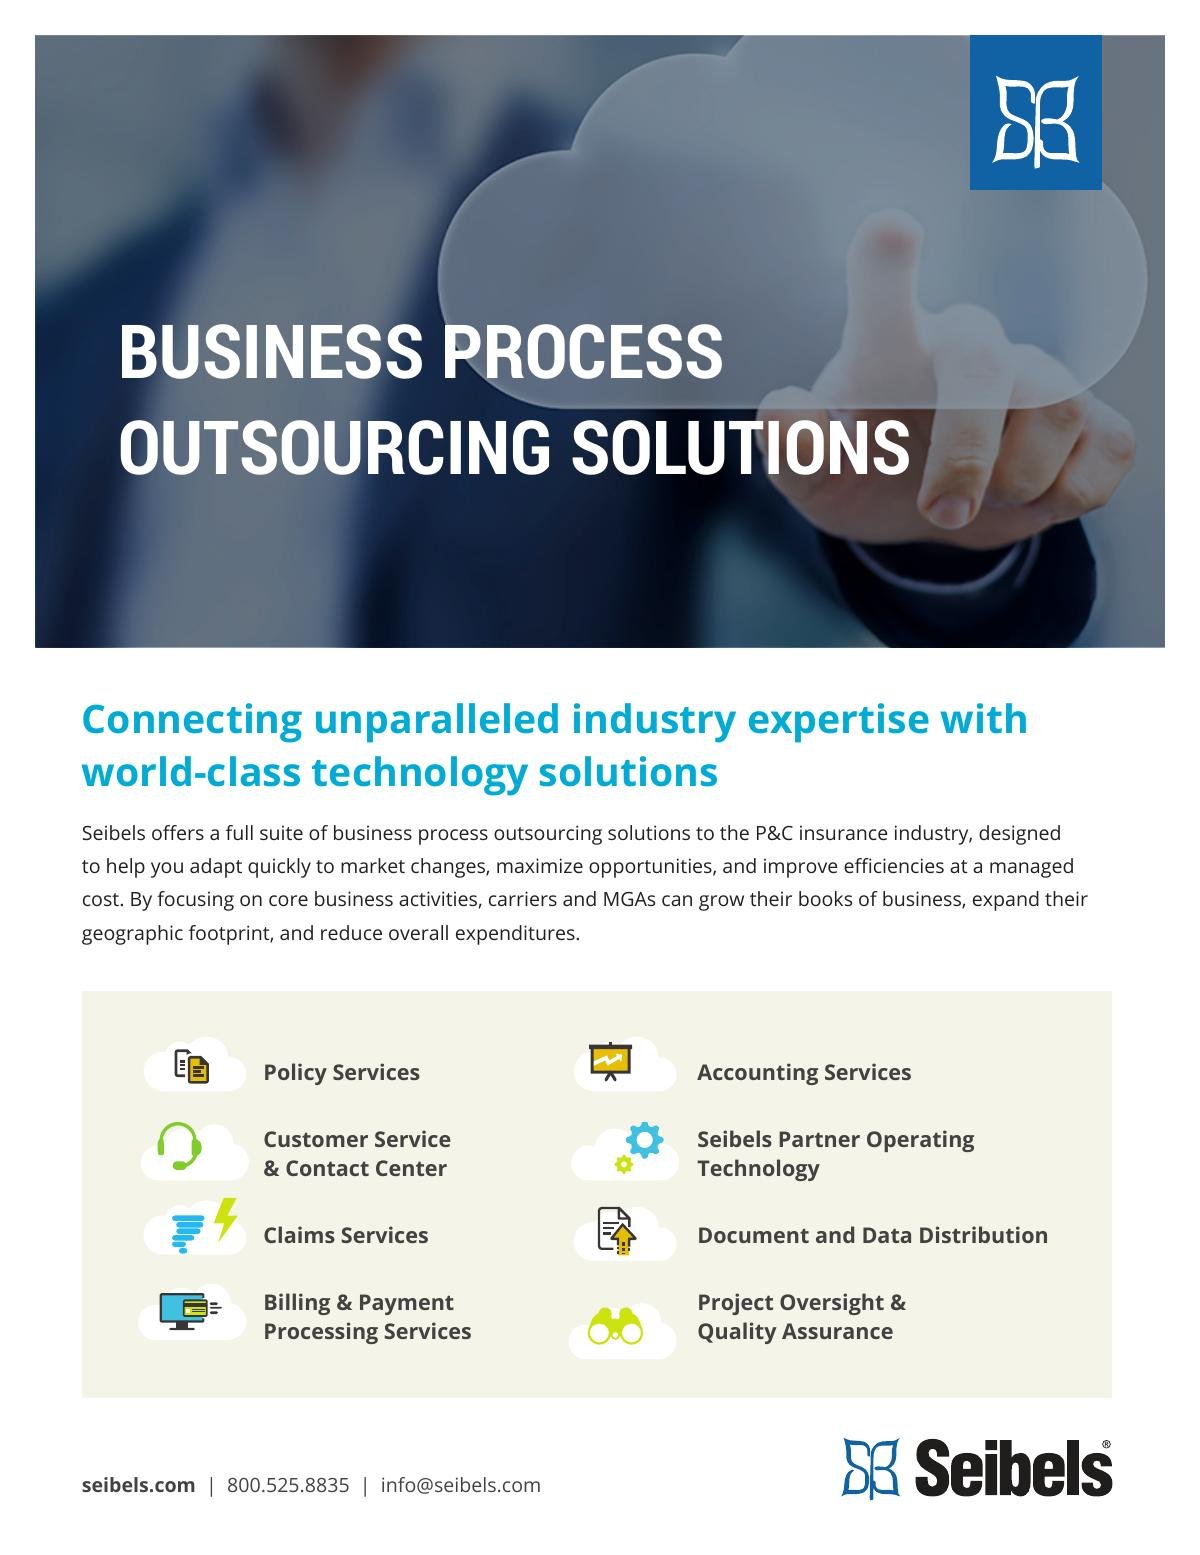 Business Process Outsourcing: Connecting unparalleled industry expertise with world-class technology